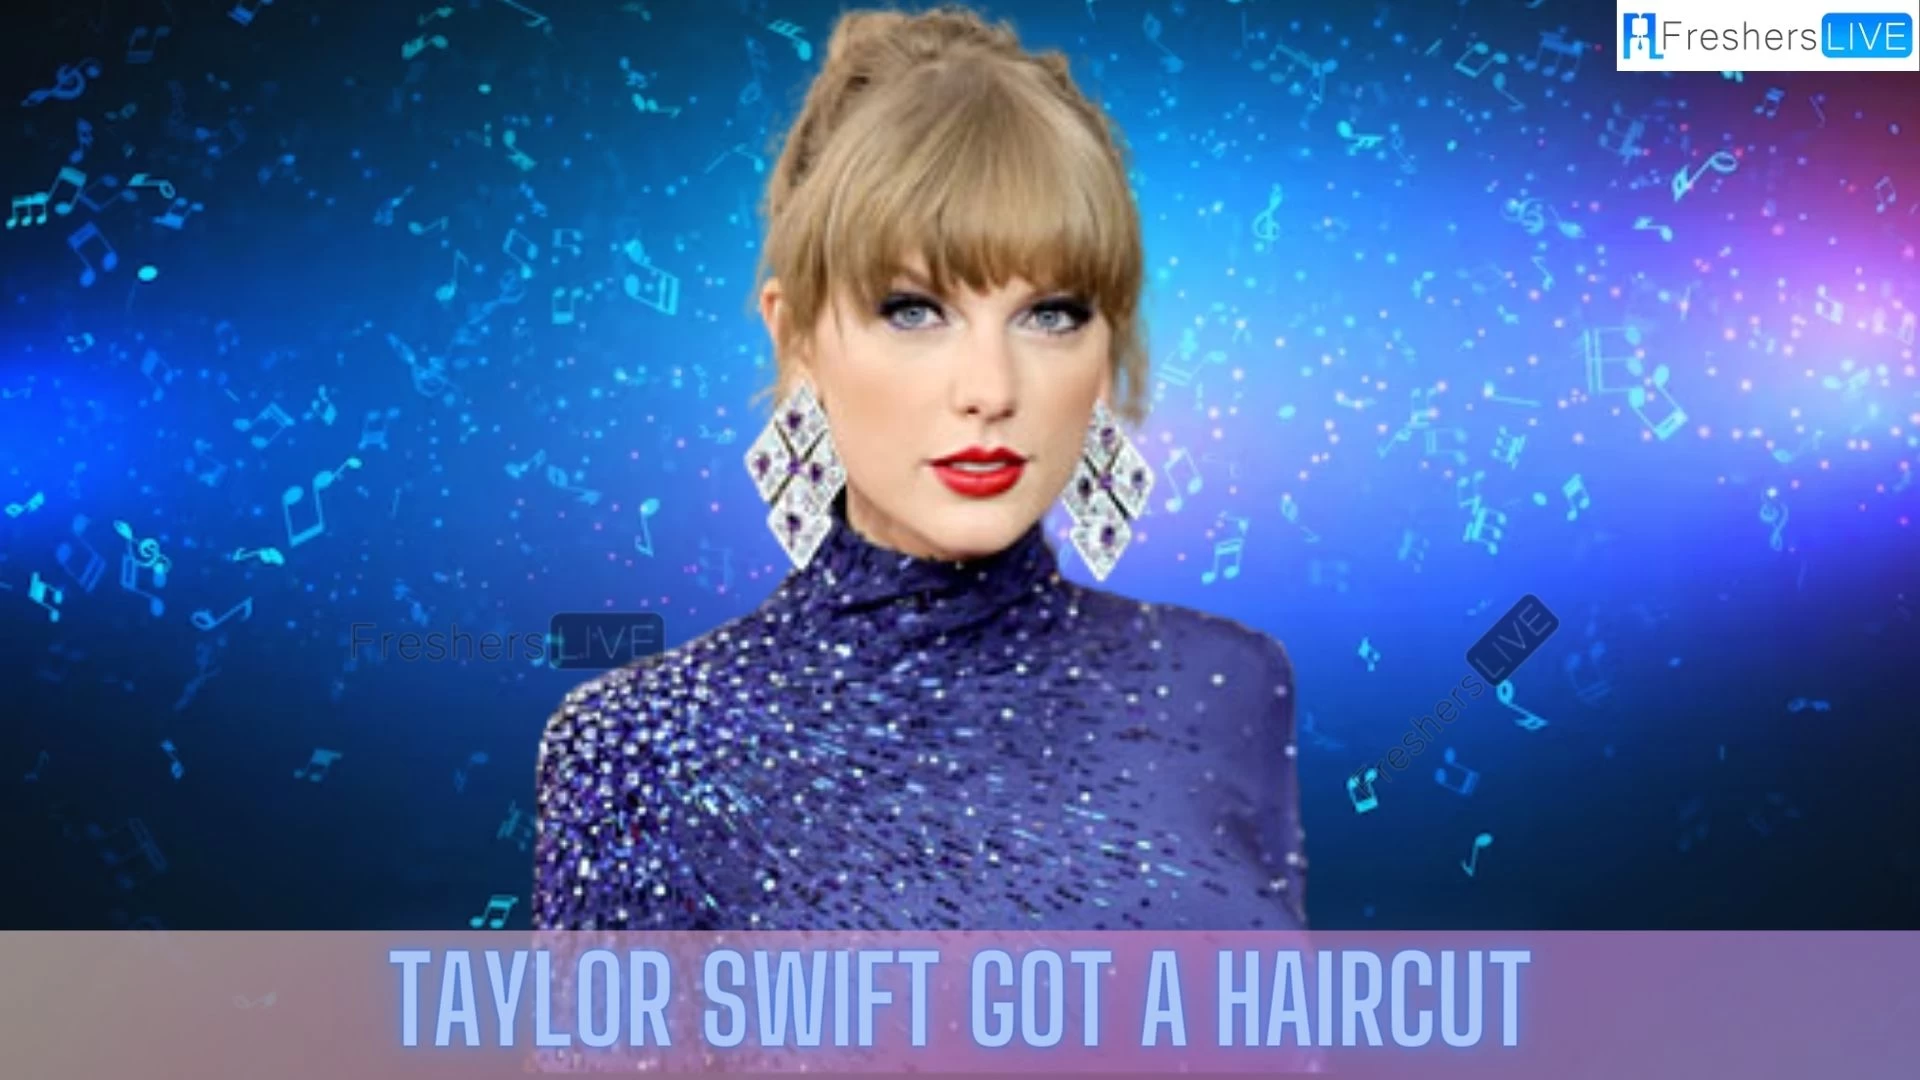 Taylor Swift Got a Haircut, Taylor Swift Collaborates With Google to Expose a Vault Song